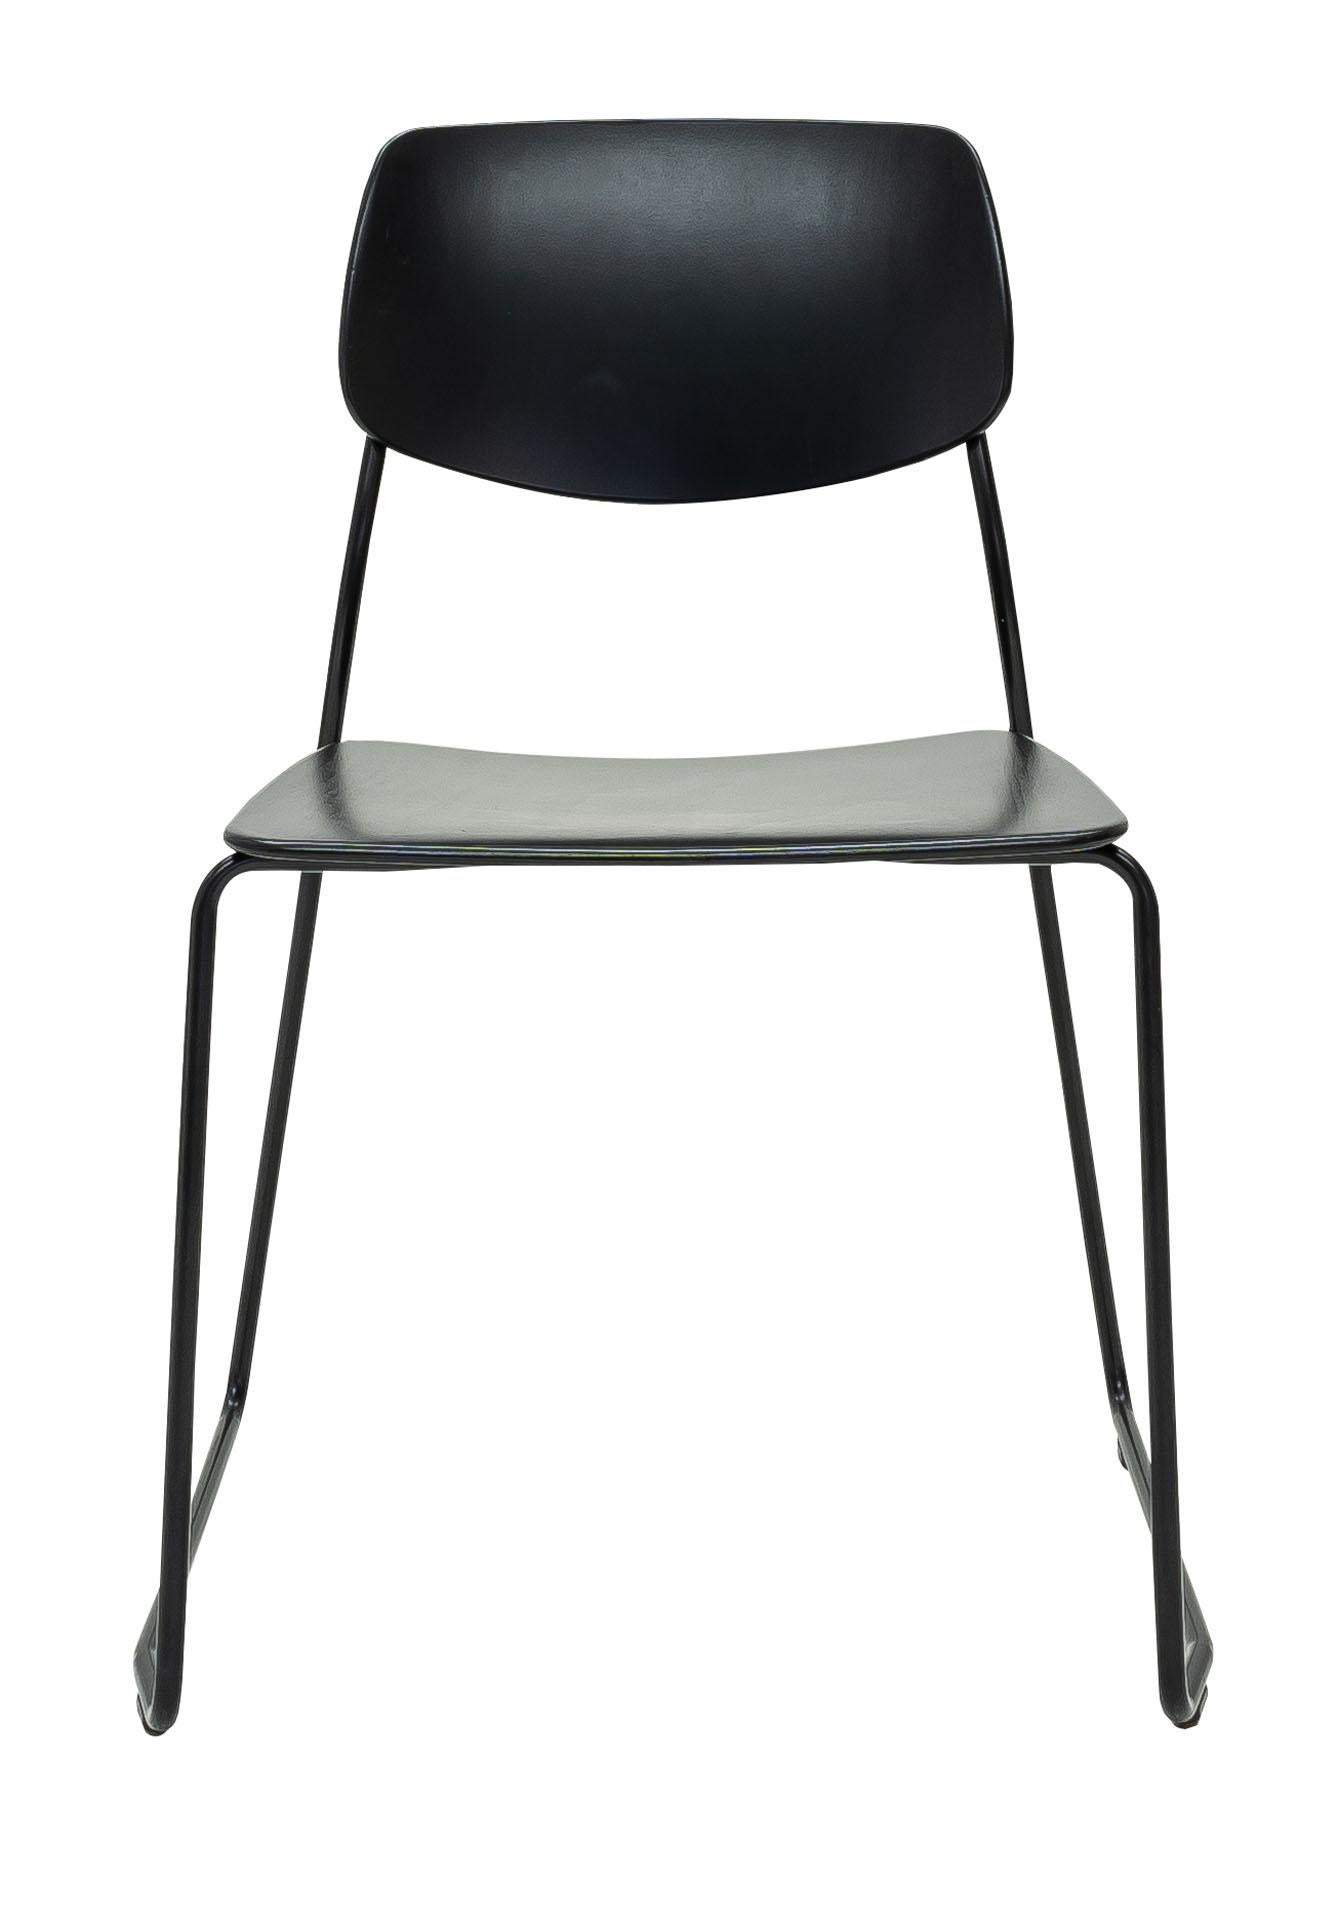 The Felber C14 is a reedition of a 1940s Classic Dietiker chair. The chair which was at first developed as a simple wooden chair in the early 40s, has been reengineered into a modular patented program.

The innovative concept of the Felber series is